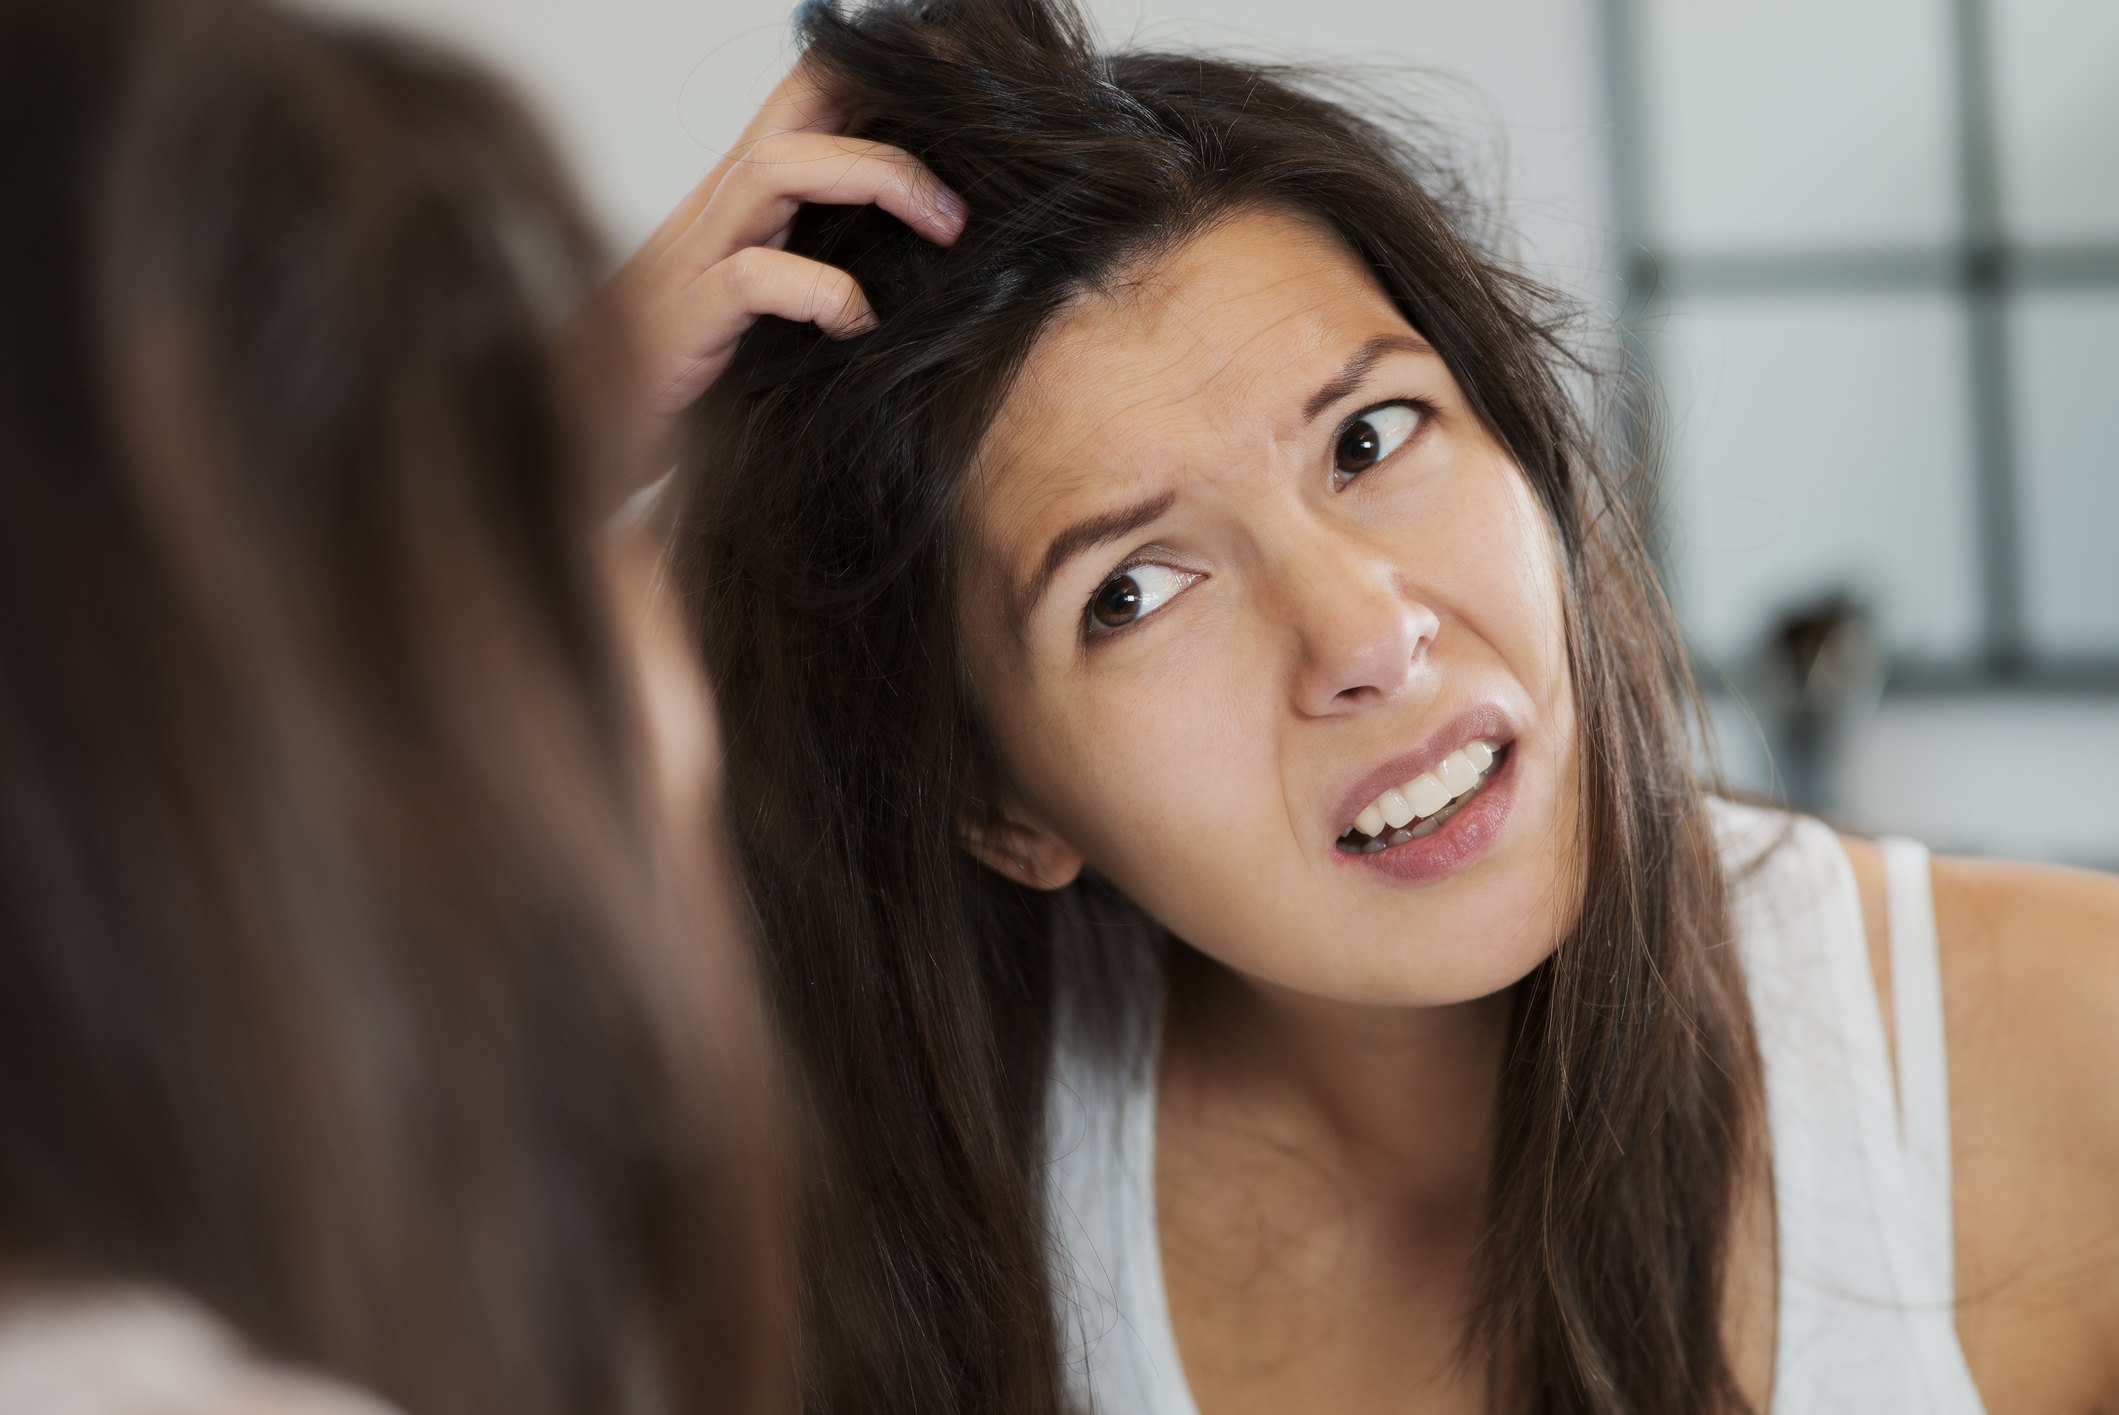 Woman with long brown hair scratches scalp while looking in the mirror.